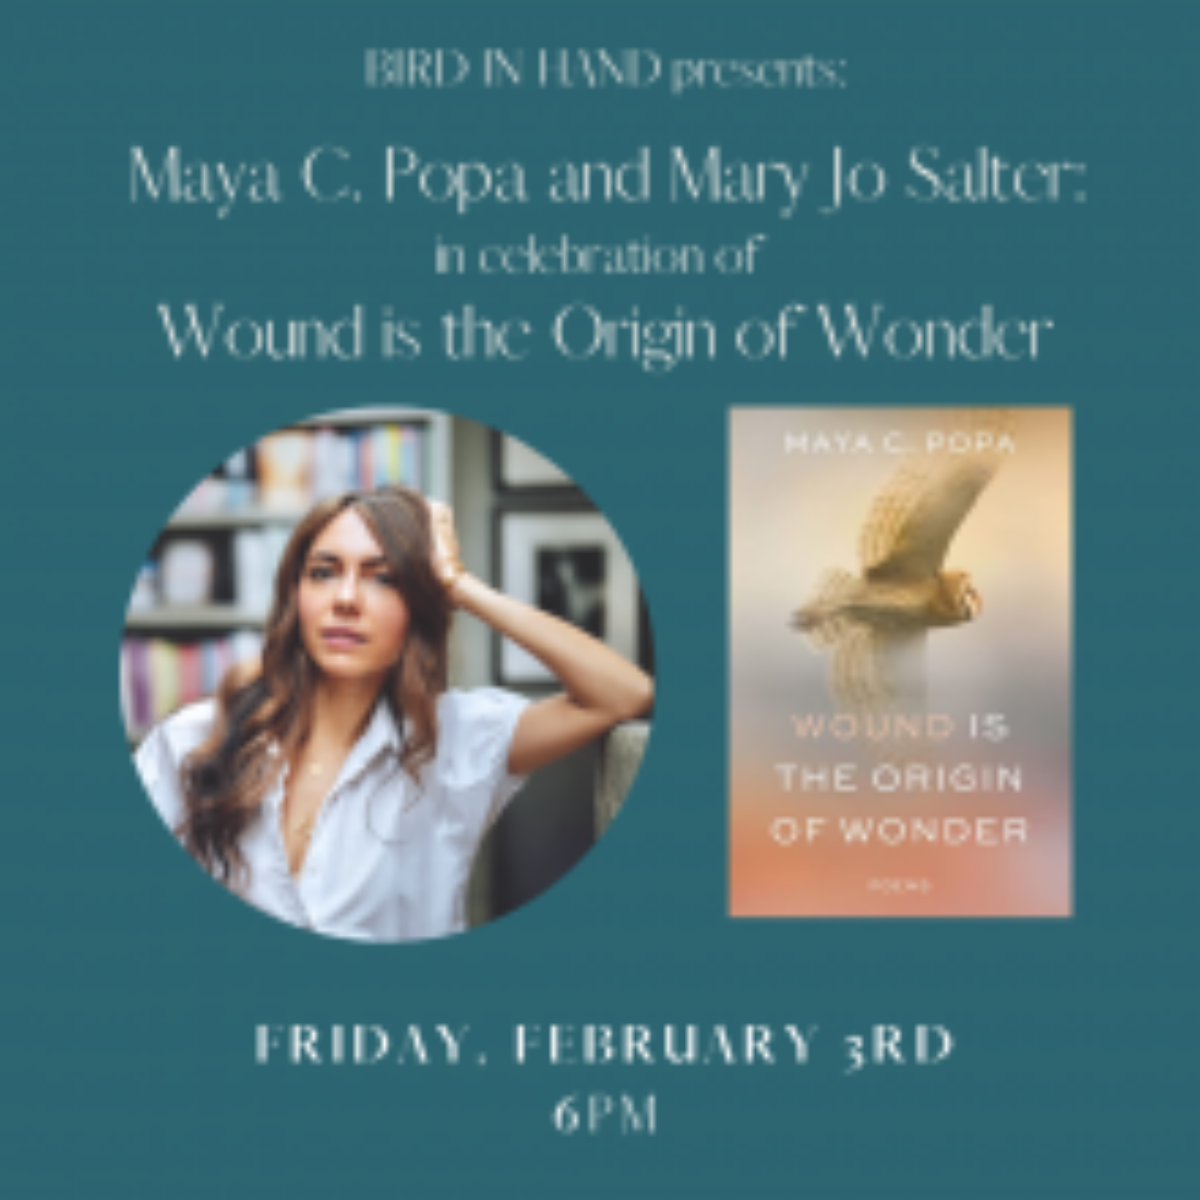 Maya Popa And Mary Jo Salter: Celebrating Wound Is The Origin Of Wonder